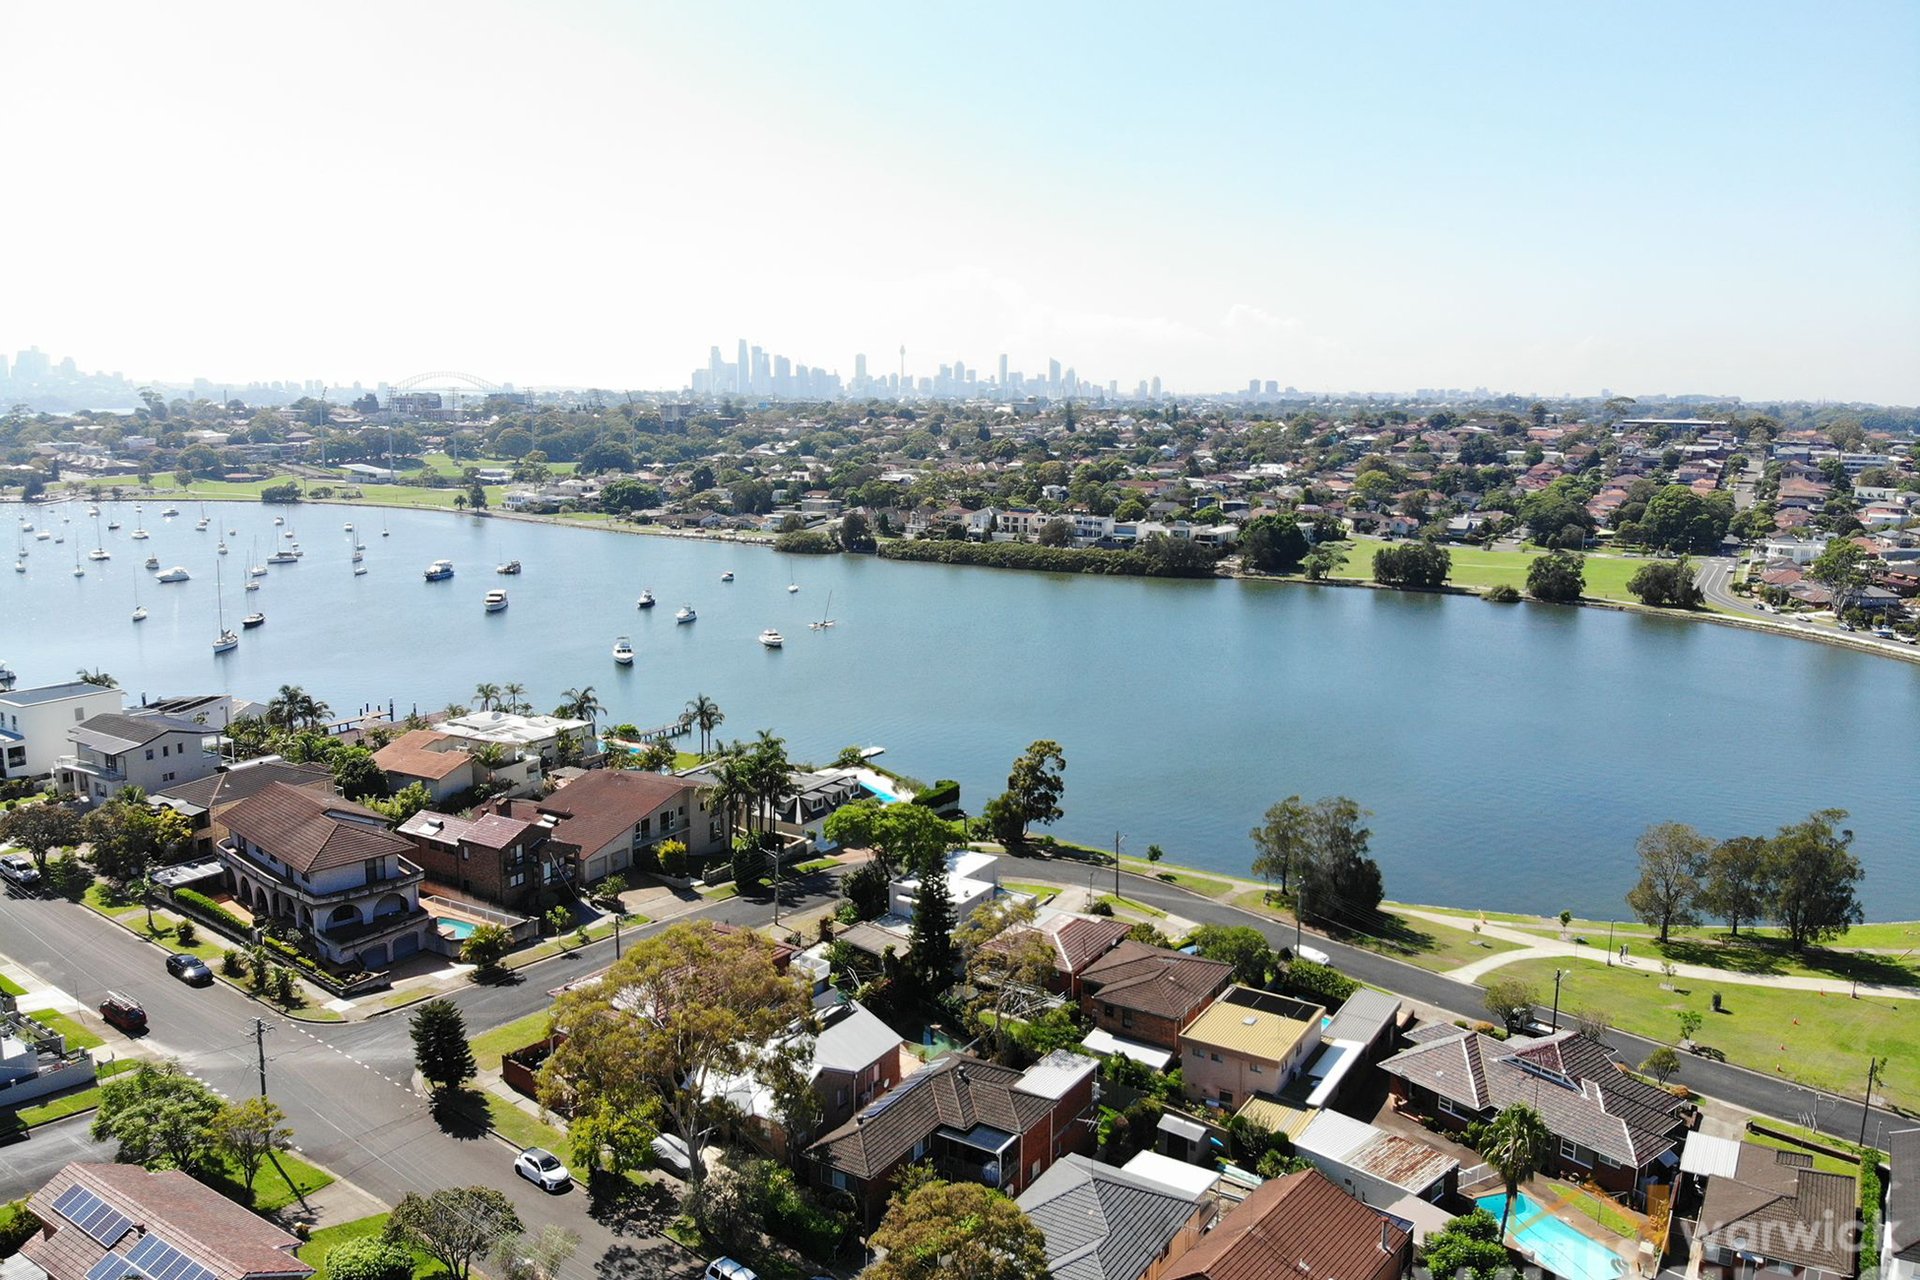 A partial aerial view of the Hunters Hill suburb in Sydney, New South Wales, Australia